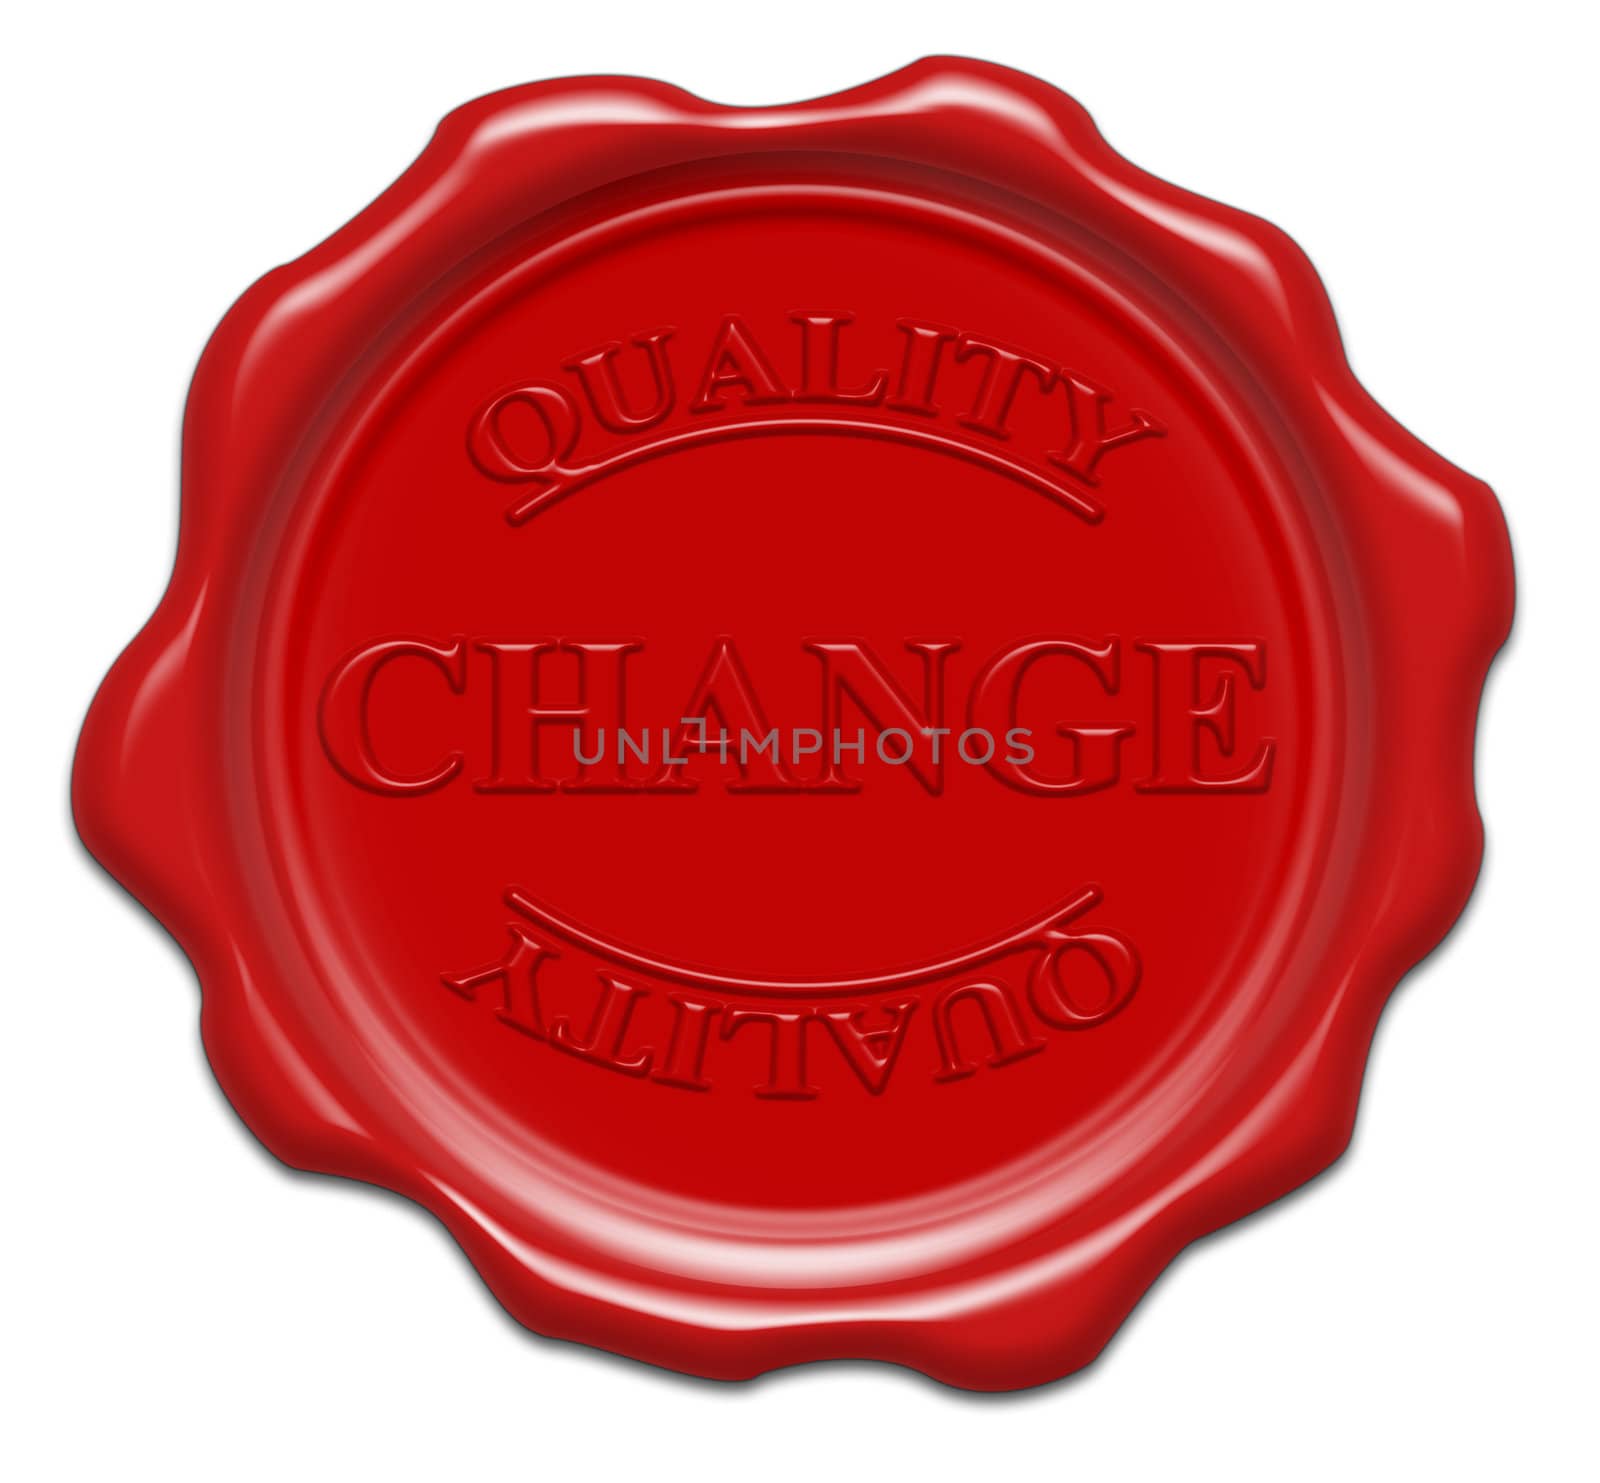 quality change - illustration red wax seal isolated on white bac by mozzyb